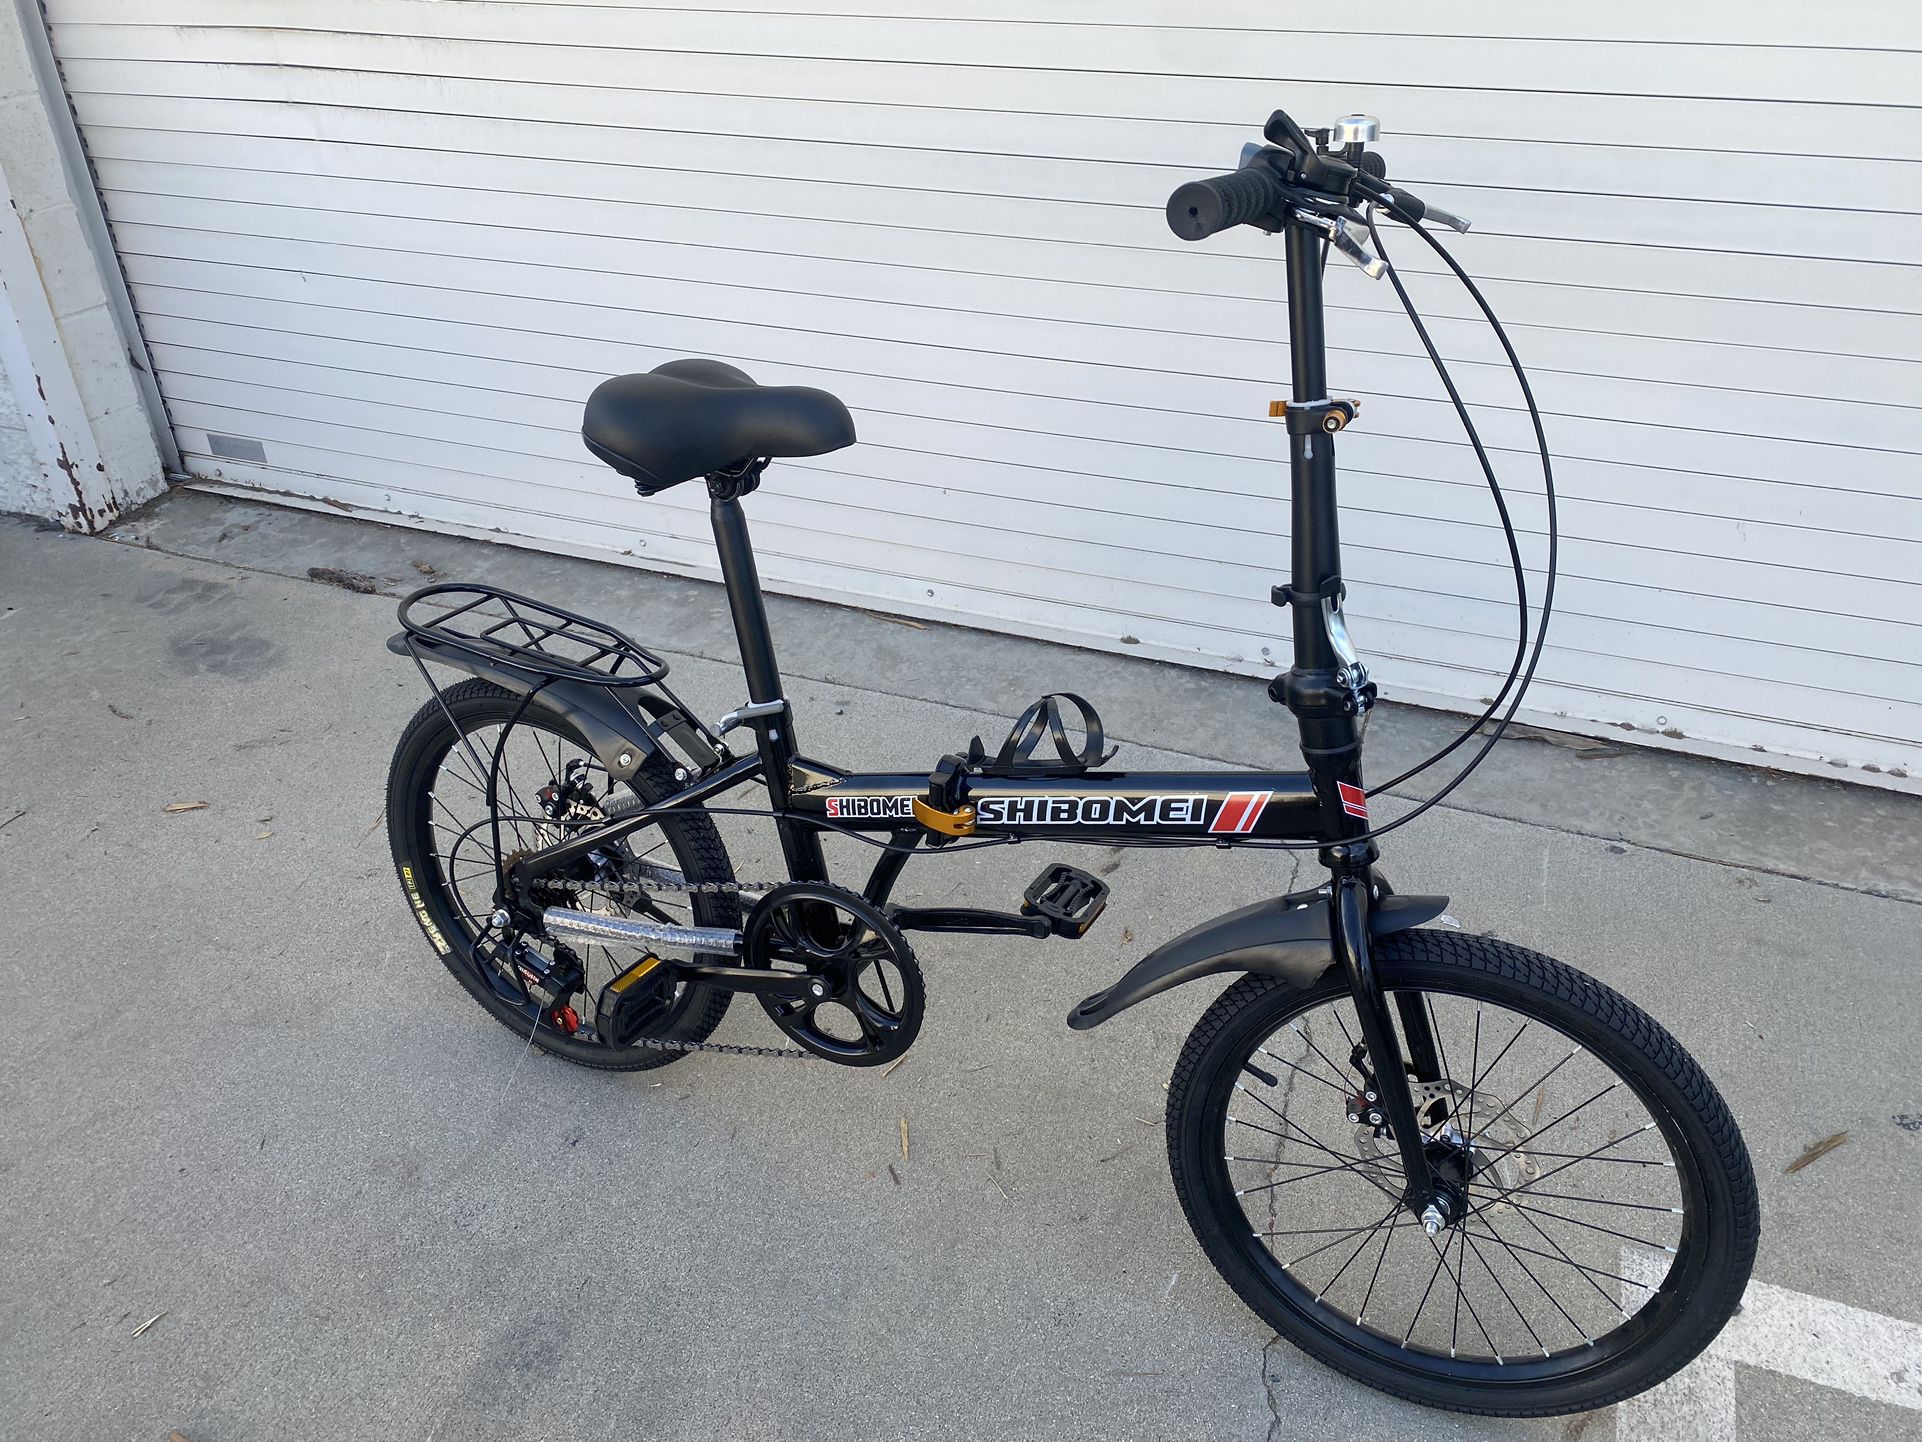 20 “ folding Bicycle Bike For Adult or Youth Not Electric Bike